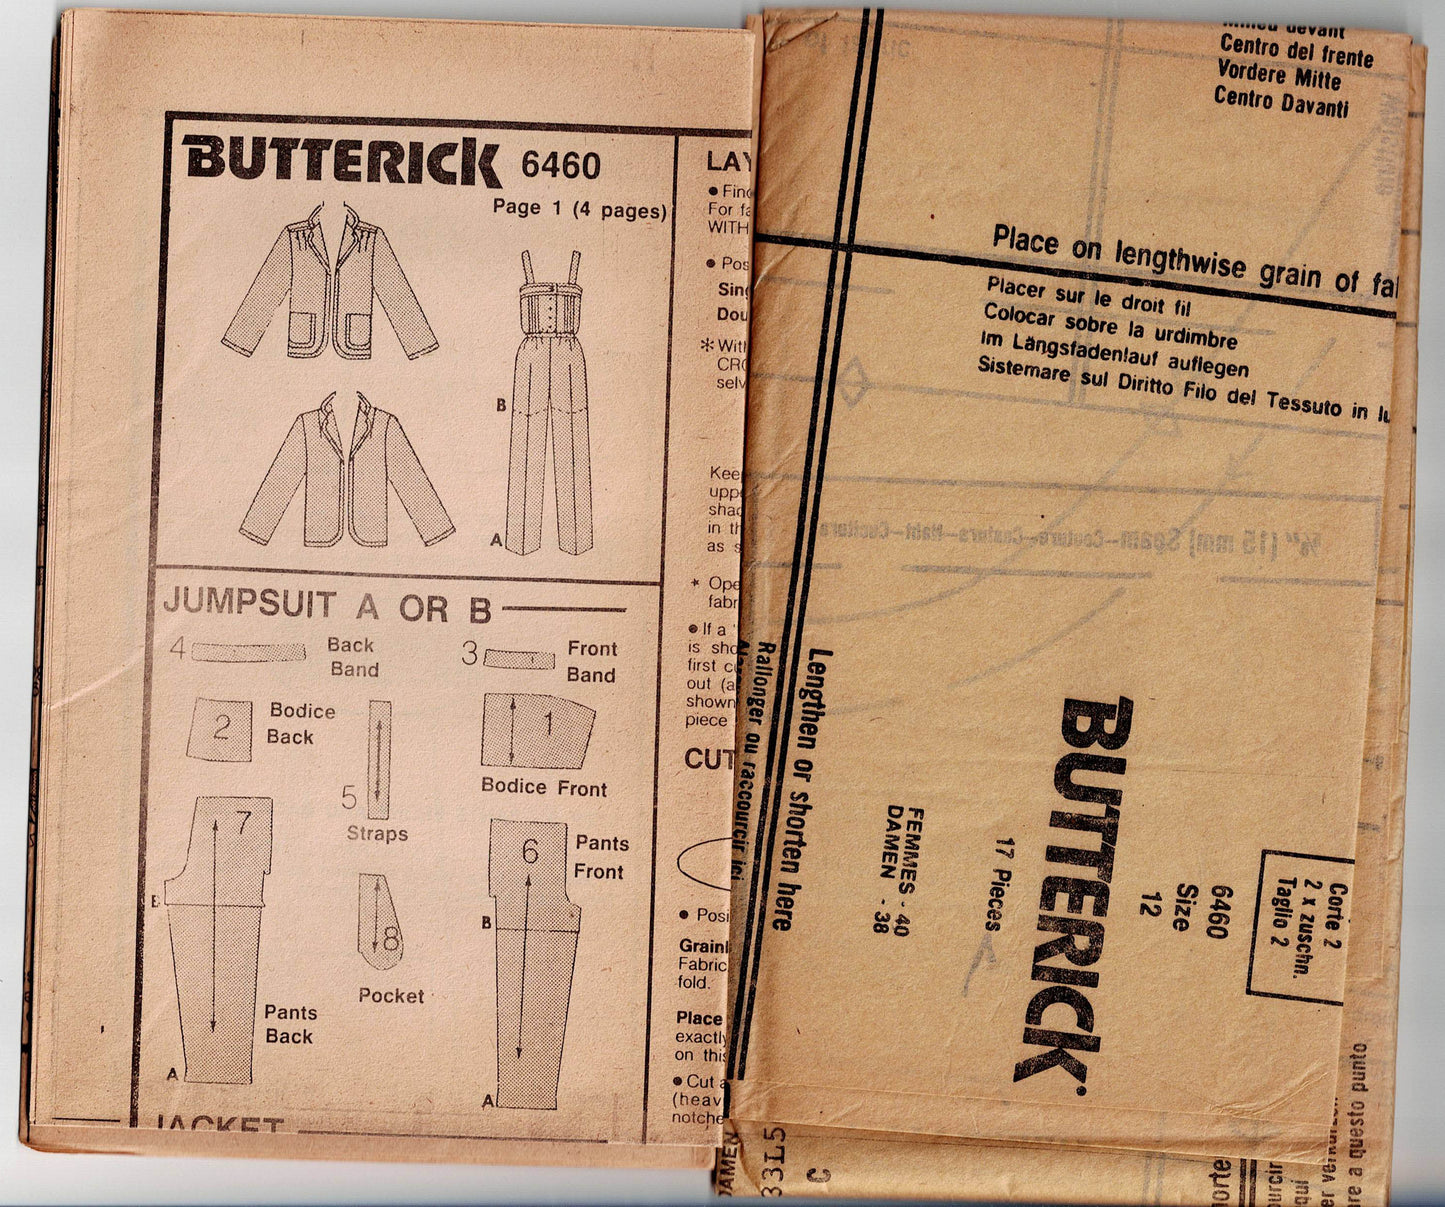 Butterick 6460 Womens Pin Tucked Bodice Jumpsuits & Jacket 1980s Vintage Sewing Pattern Size 12 Bust 34 inches UNCUT Factory Folded